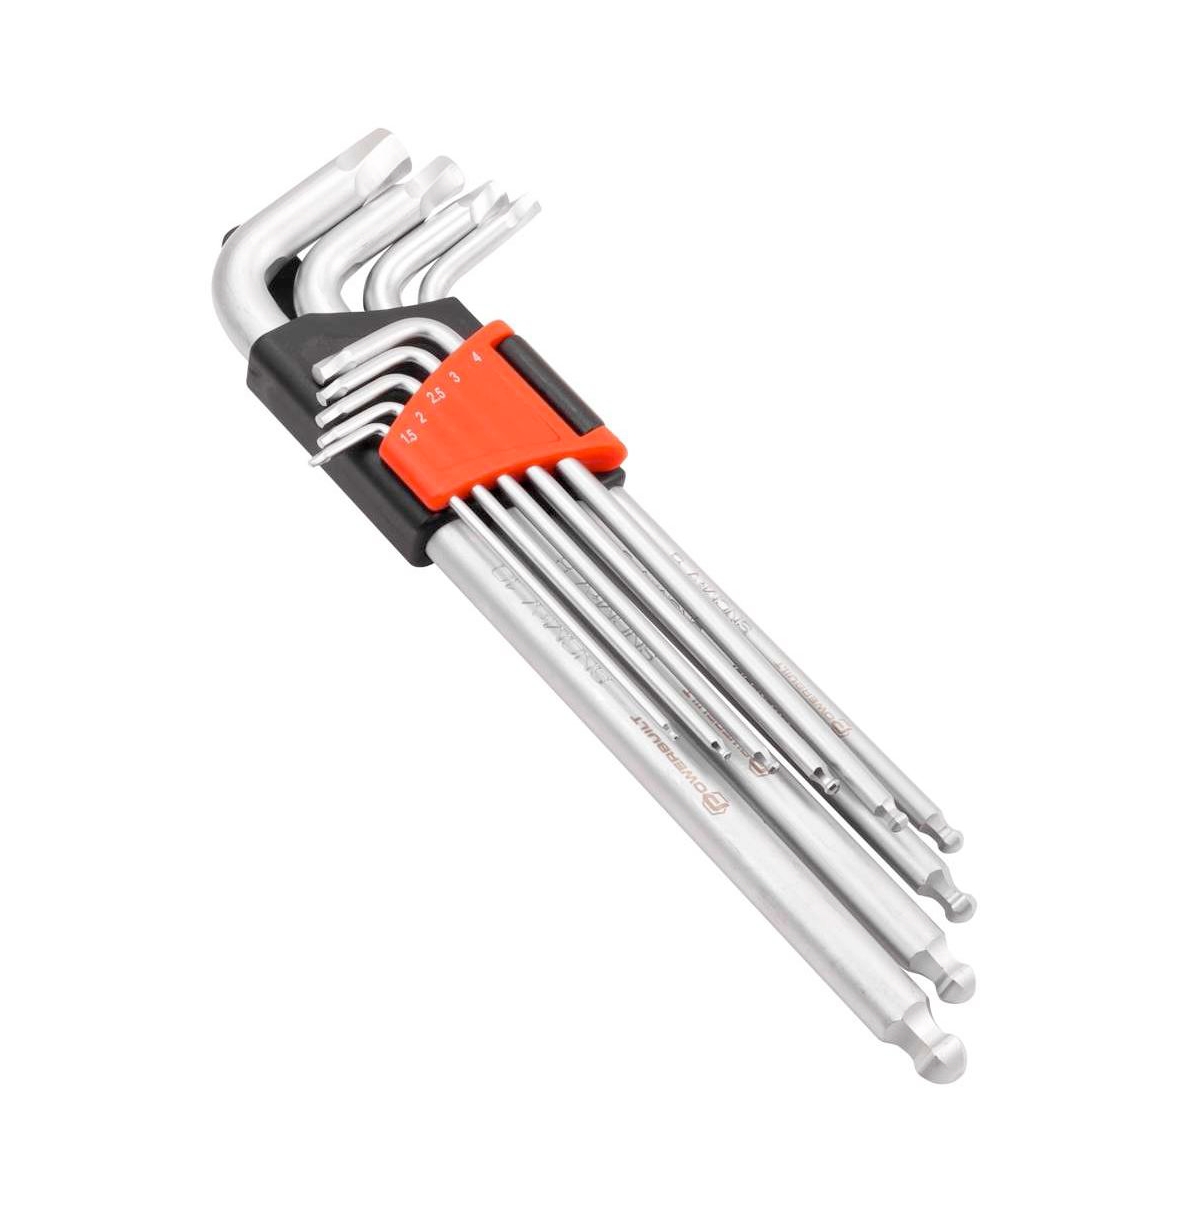 9 Piece Zeon Metric Hex Key Wrench Set for Damaged Fasteners - Silver